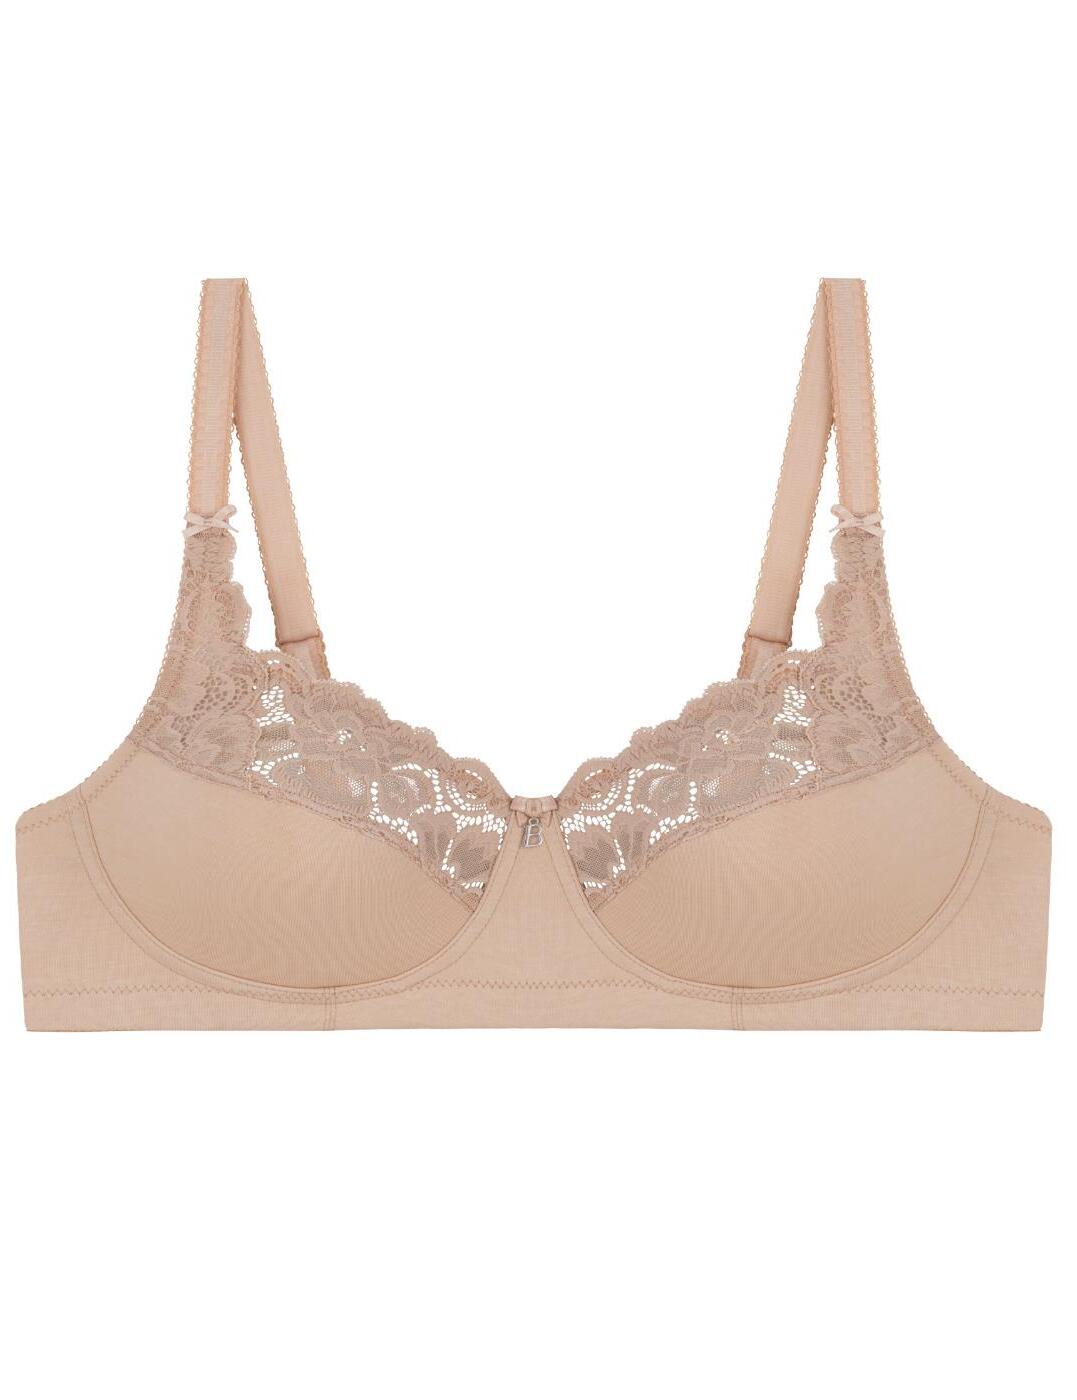 Bestform 11440 Cocoon Non-Wired Non-Padded Cotton Full Cup Bra Sand CS 